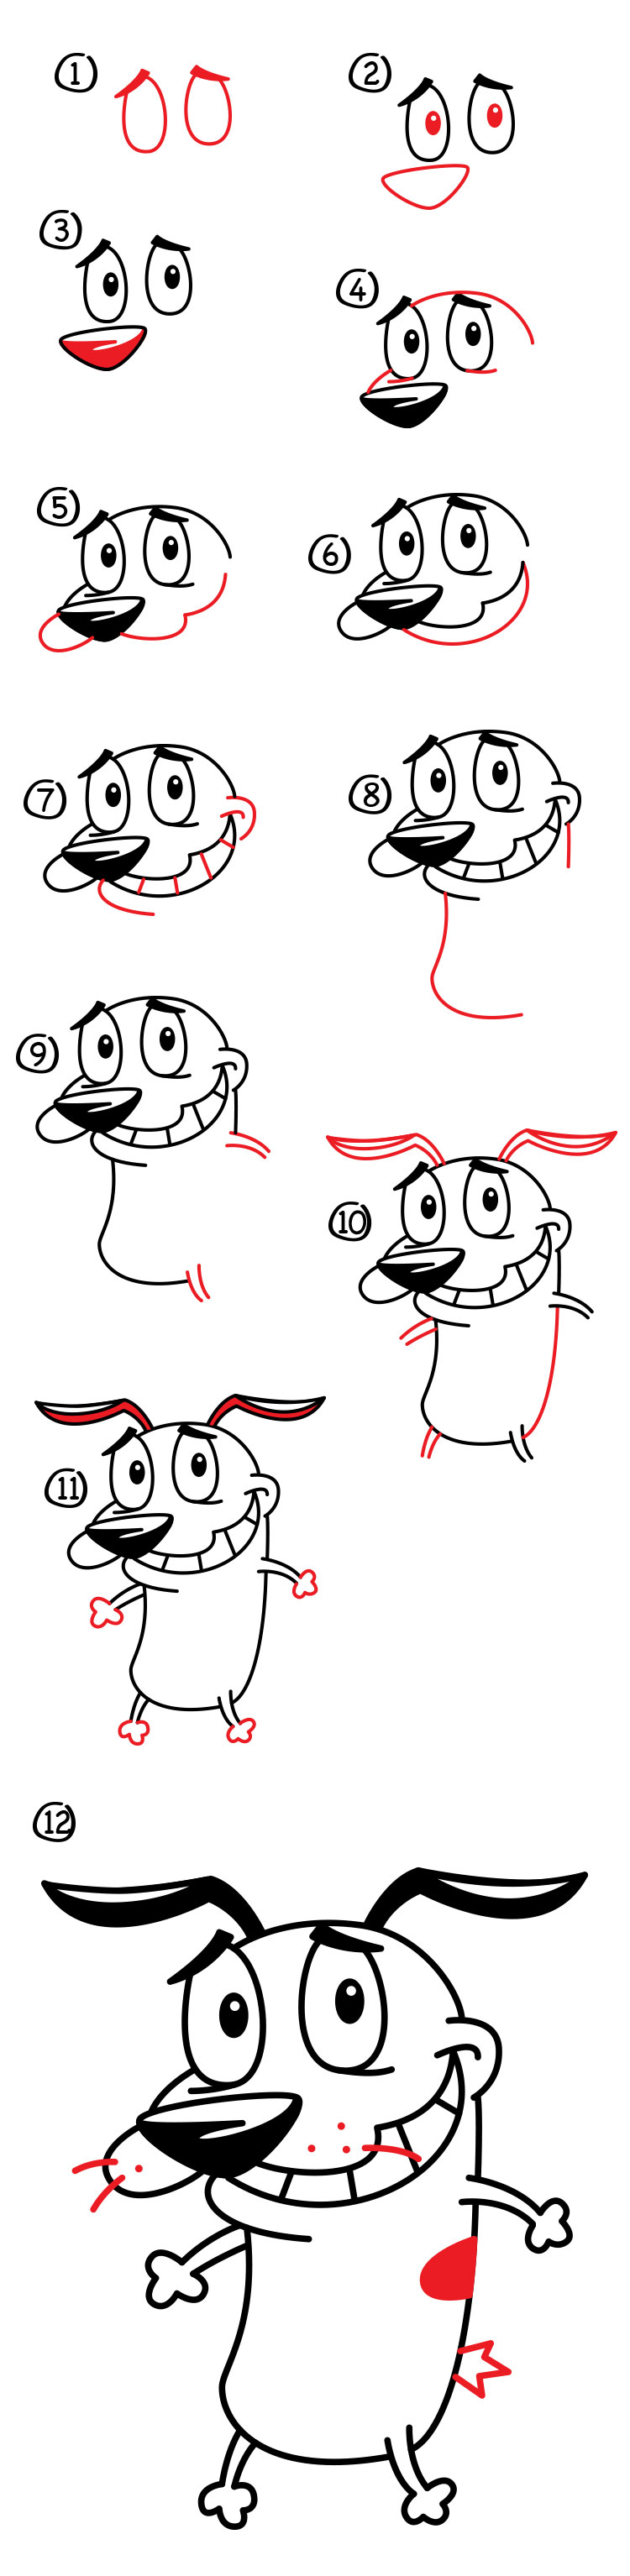 How To Draw Courage Courage The Cowardly Dog Step By vrogue.co